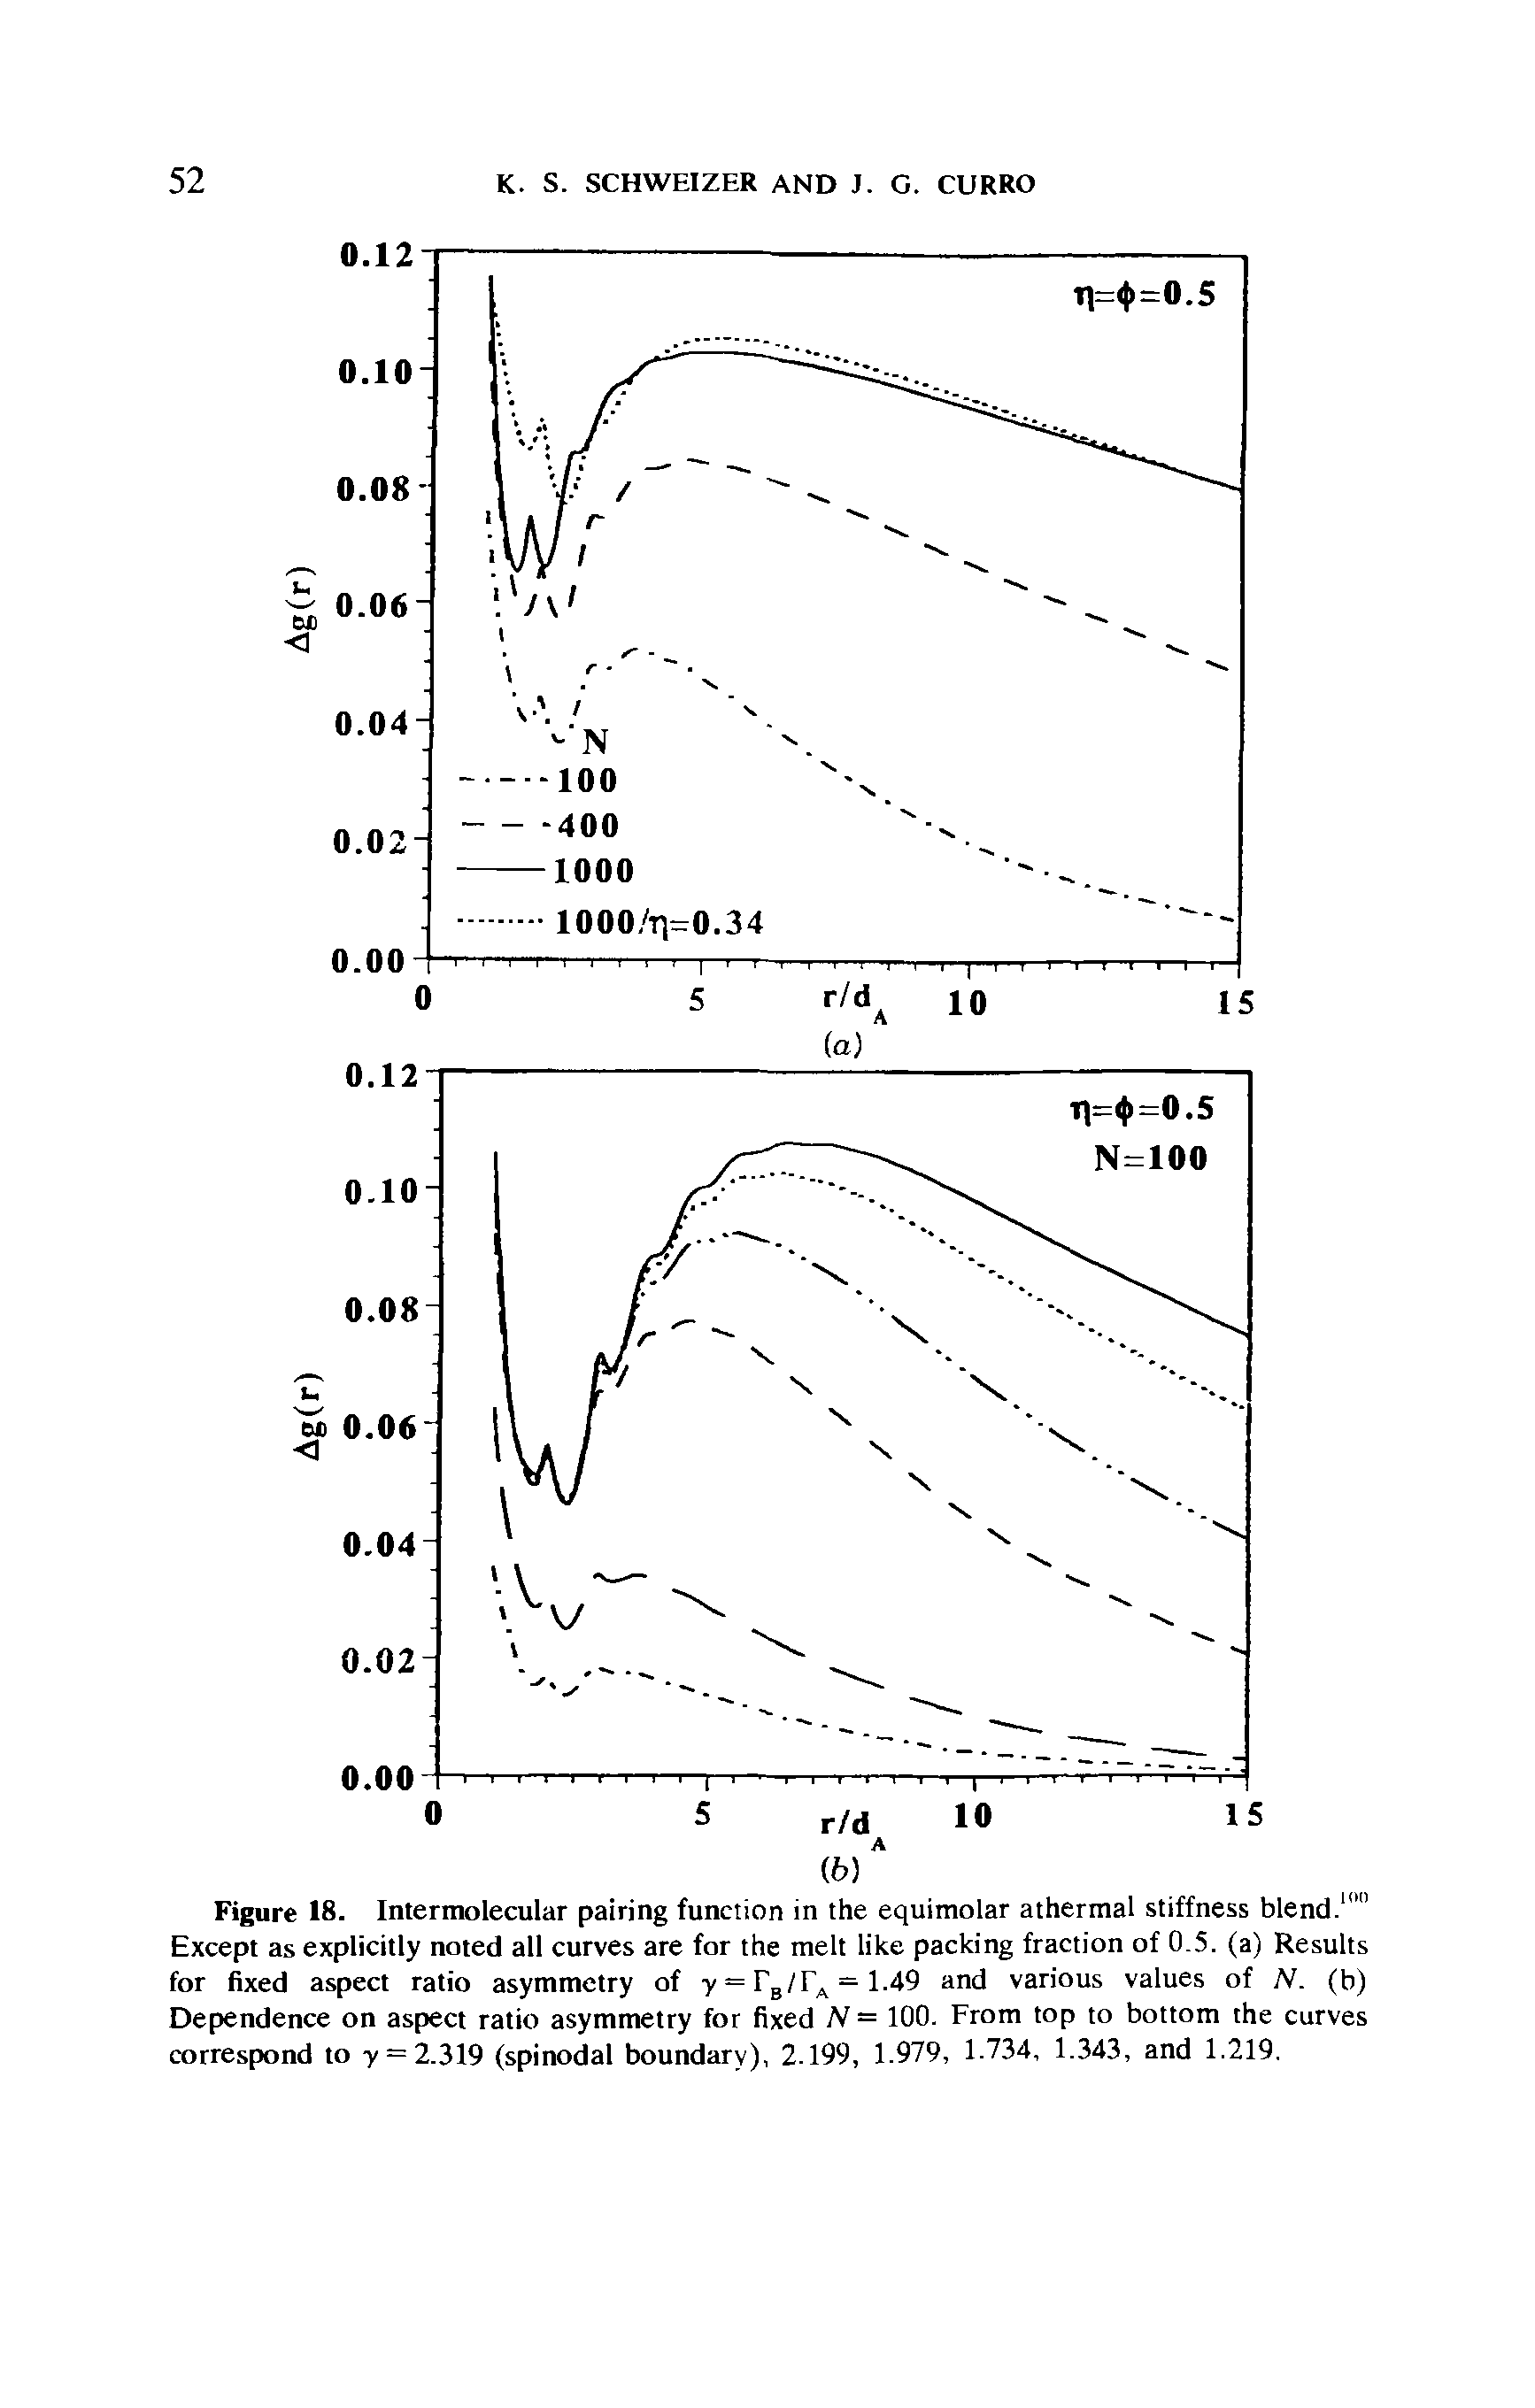 Figure 18. Intermolecular pairing function in the equimolar athermal stiffness blend. " Except as explicitly noted all curves are for the melt like packing fraction of 0.5. (a) Results for fixed aspect ratio asymmetry of y = rg/r = 1.49 and various values of N. (b) Dependence on aspect ratio asymmetry for fixed N= 100. From top to bottom the curves correspond to -y = 2.319 (spinodal boundary), 2.199, 1.979, 1.734, 1.343, and 1.219.